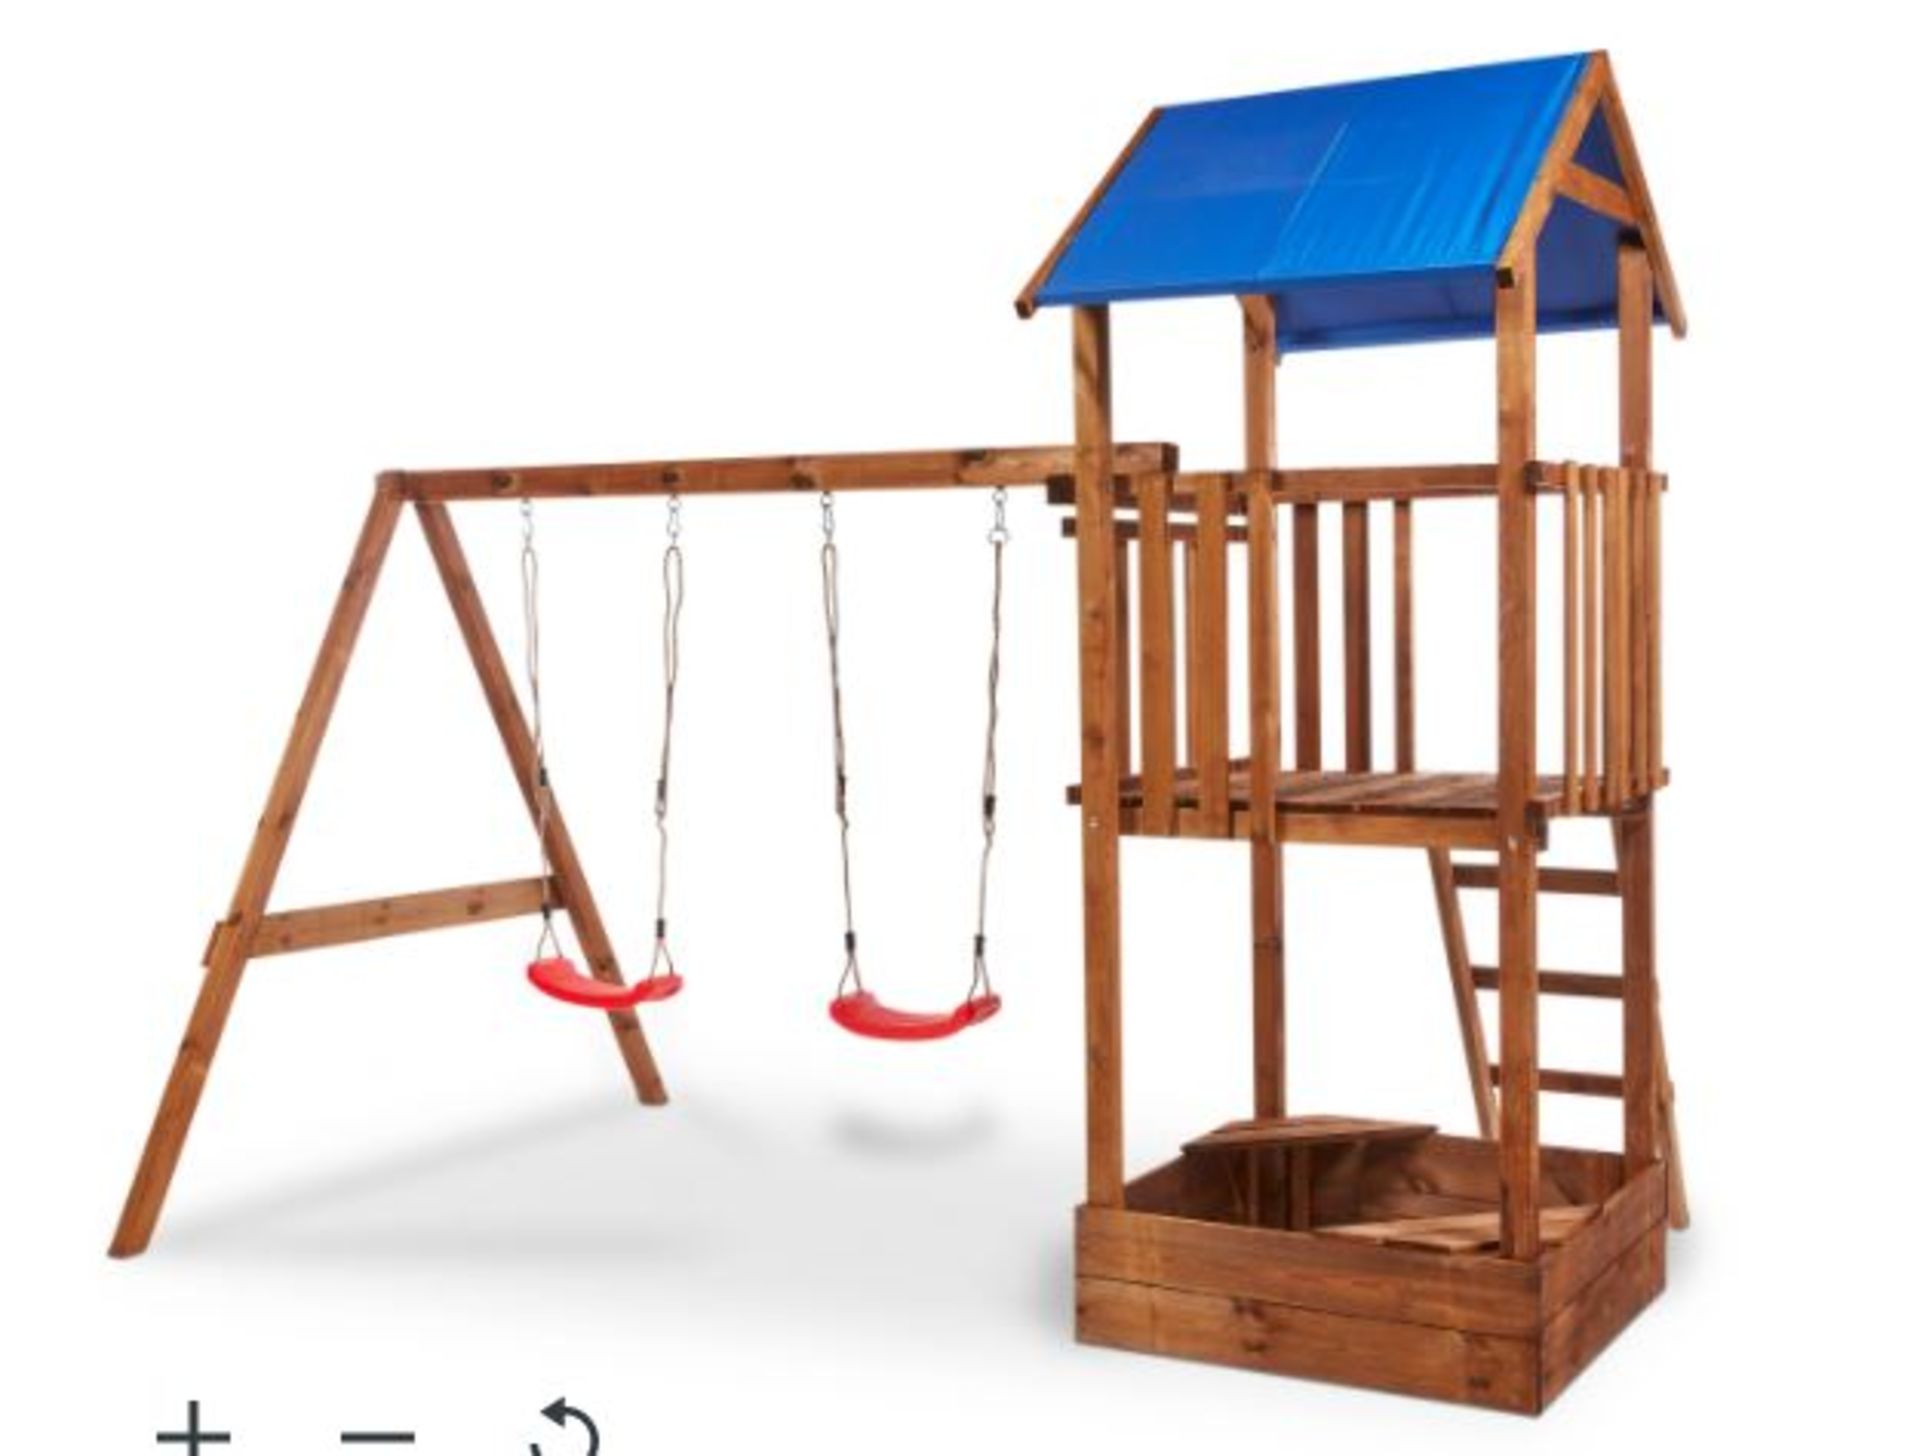 Janer Wooden Swing Set. This Janek swing set comes with swing seats, swing hooks, tower, roof